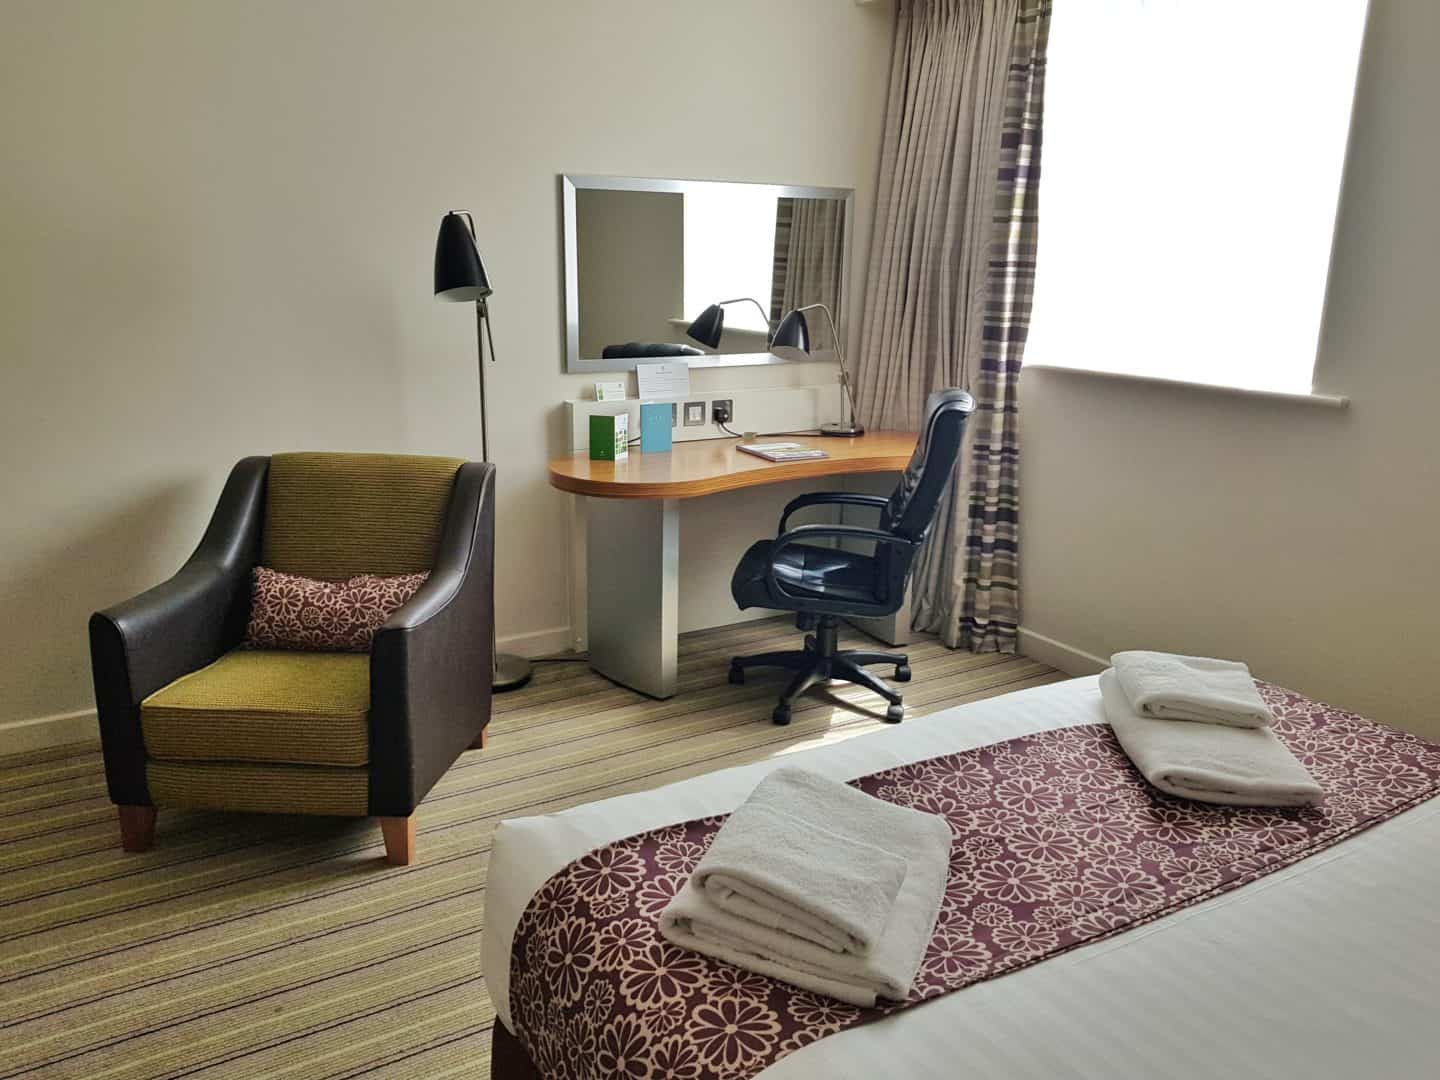 Desk, bed and chairs at Winchester Holiday Inn